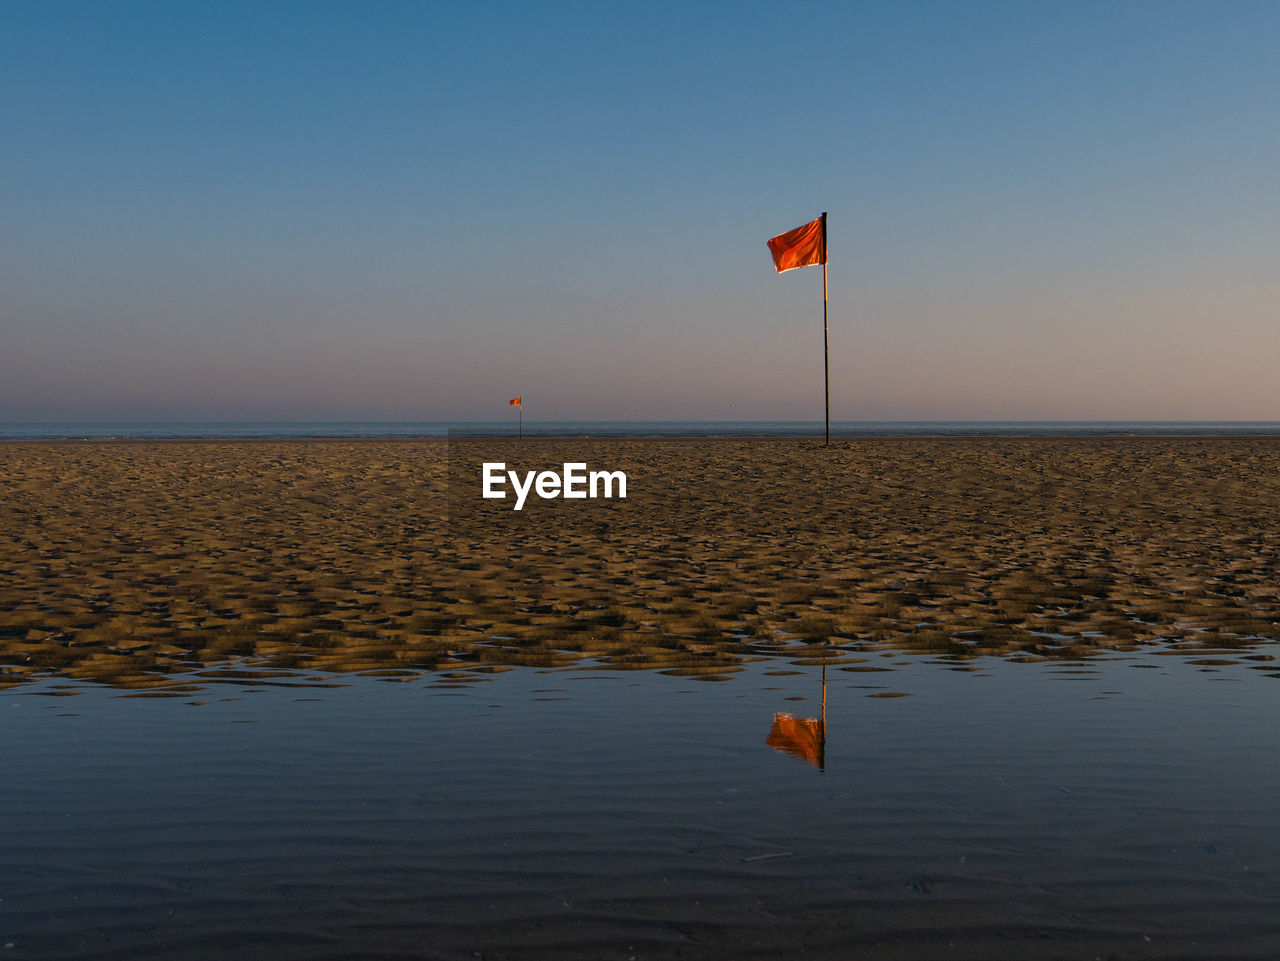 Red flag mirroring in water during morning hours at a beach in northern france